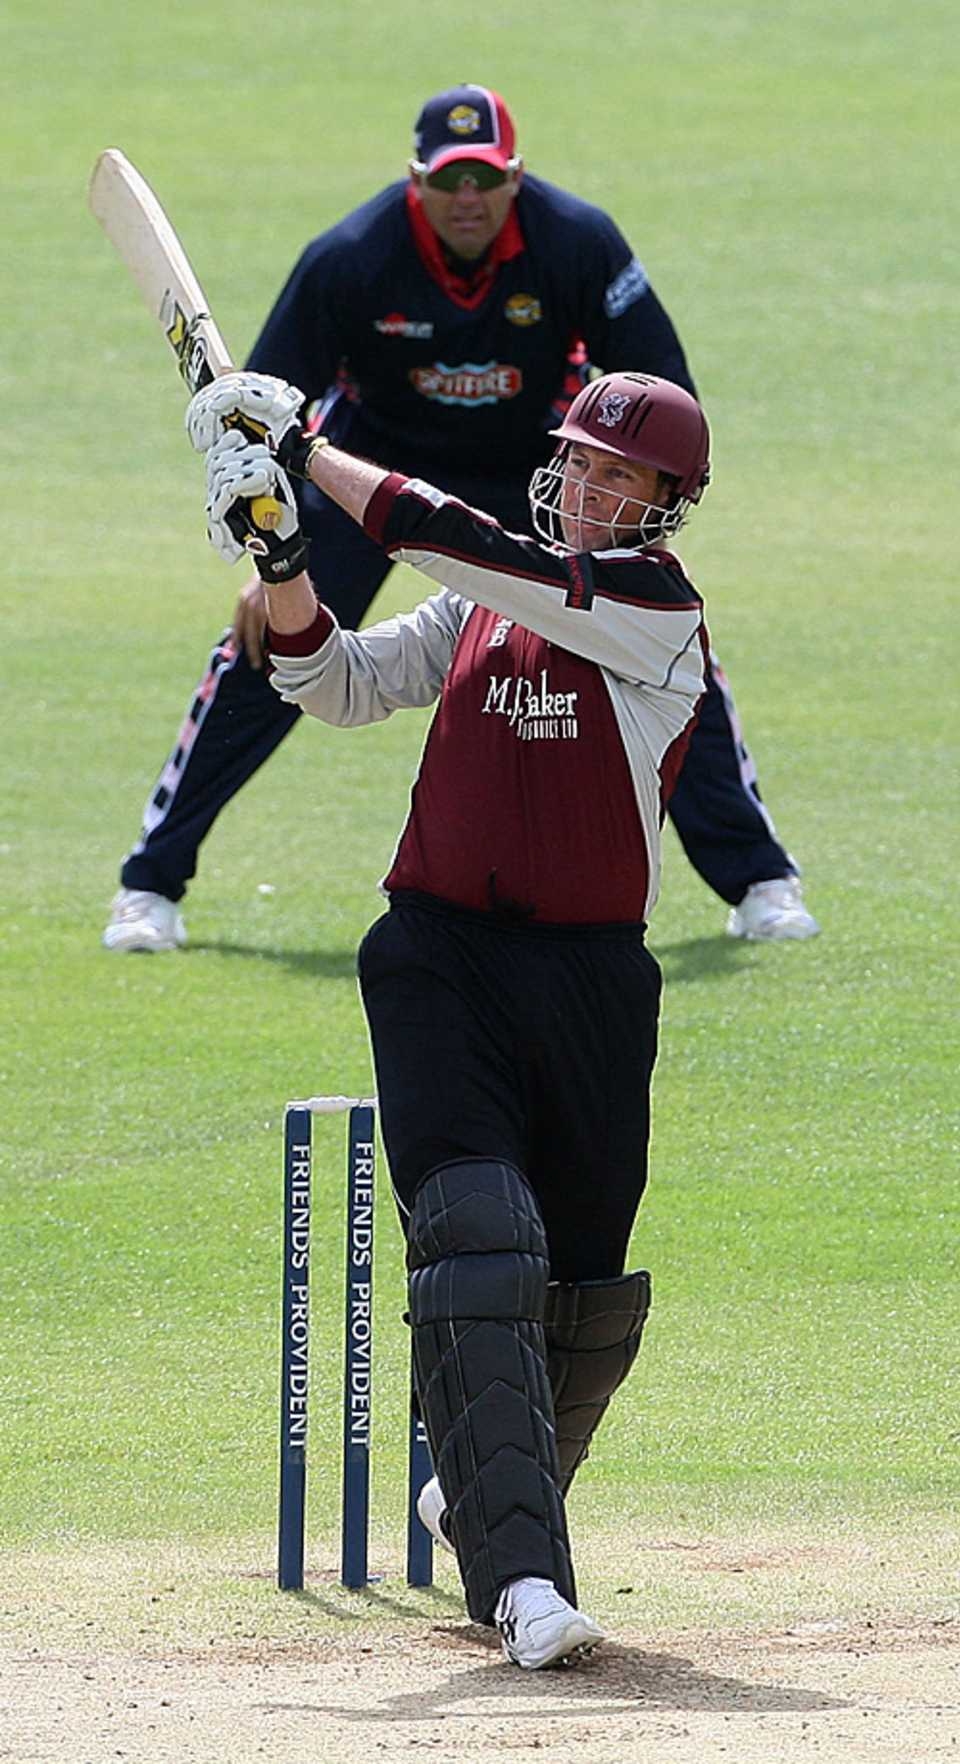 Marcus Trescothick heaves one over midwicket